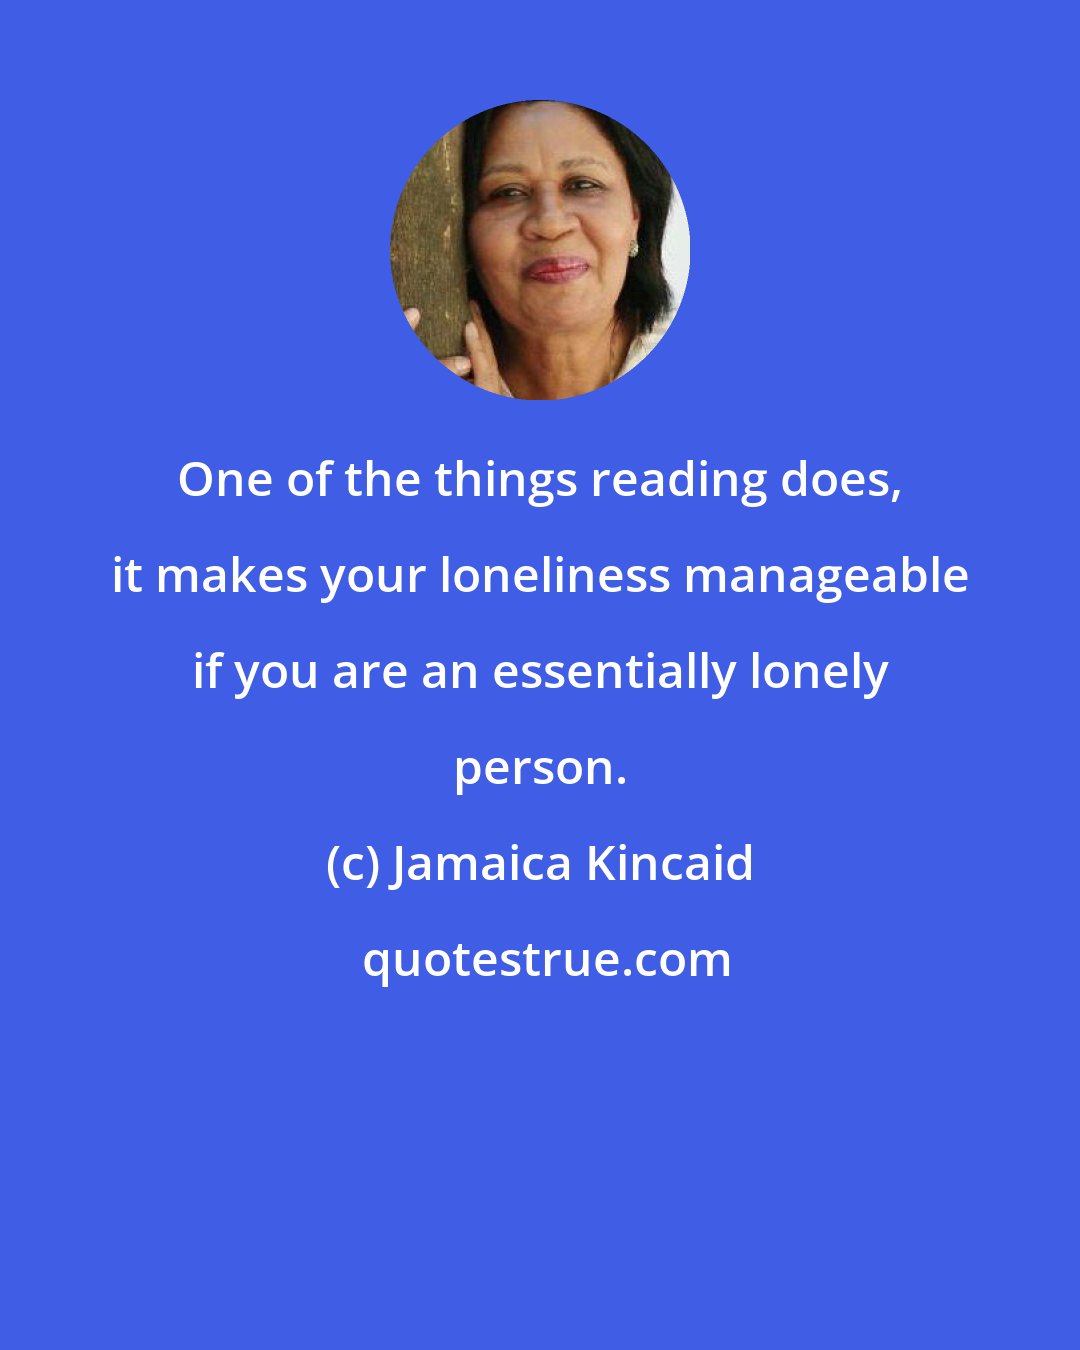 Jamaica Kincaid: One of the things reading does, it makes your loneliness manageable if you are an essentially lonely person.